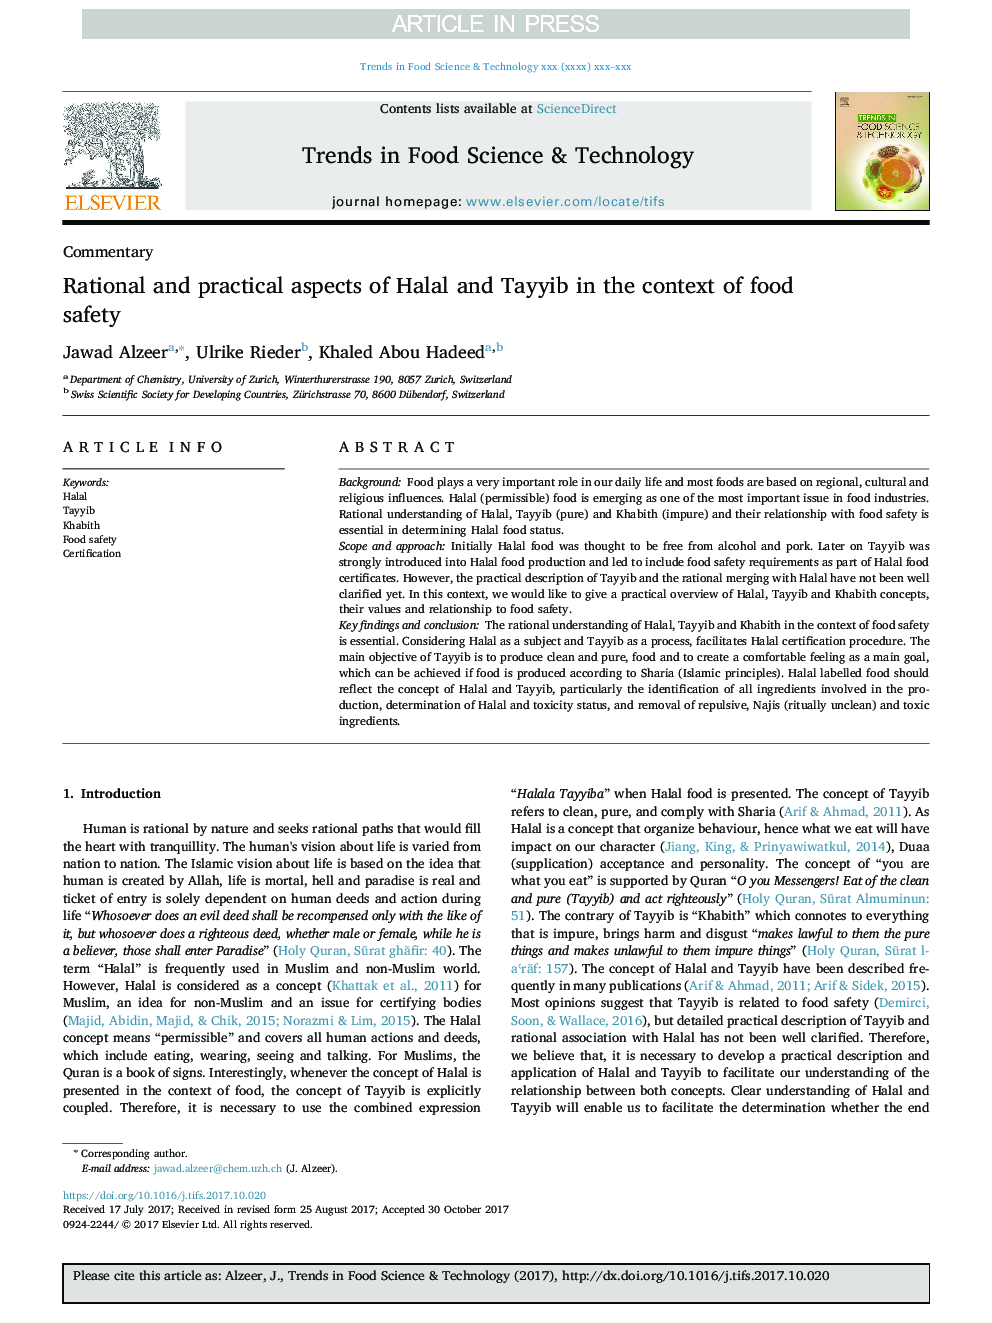 Rational and practical aspects of Halal and Tayyib in the context of food safety